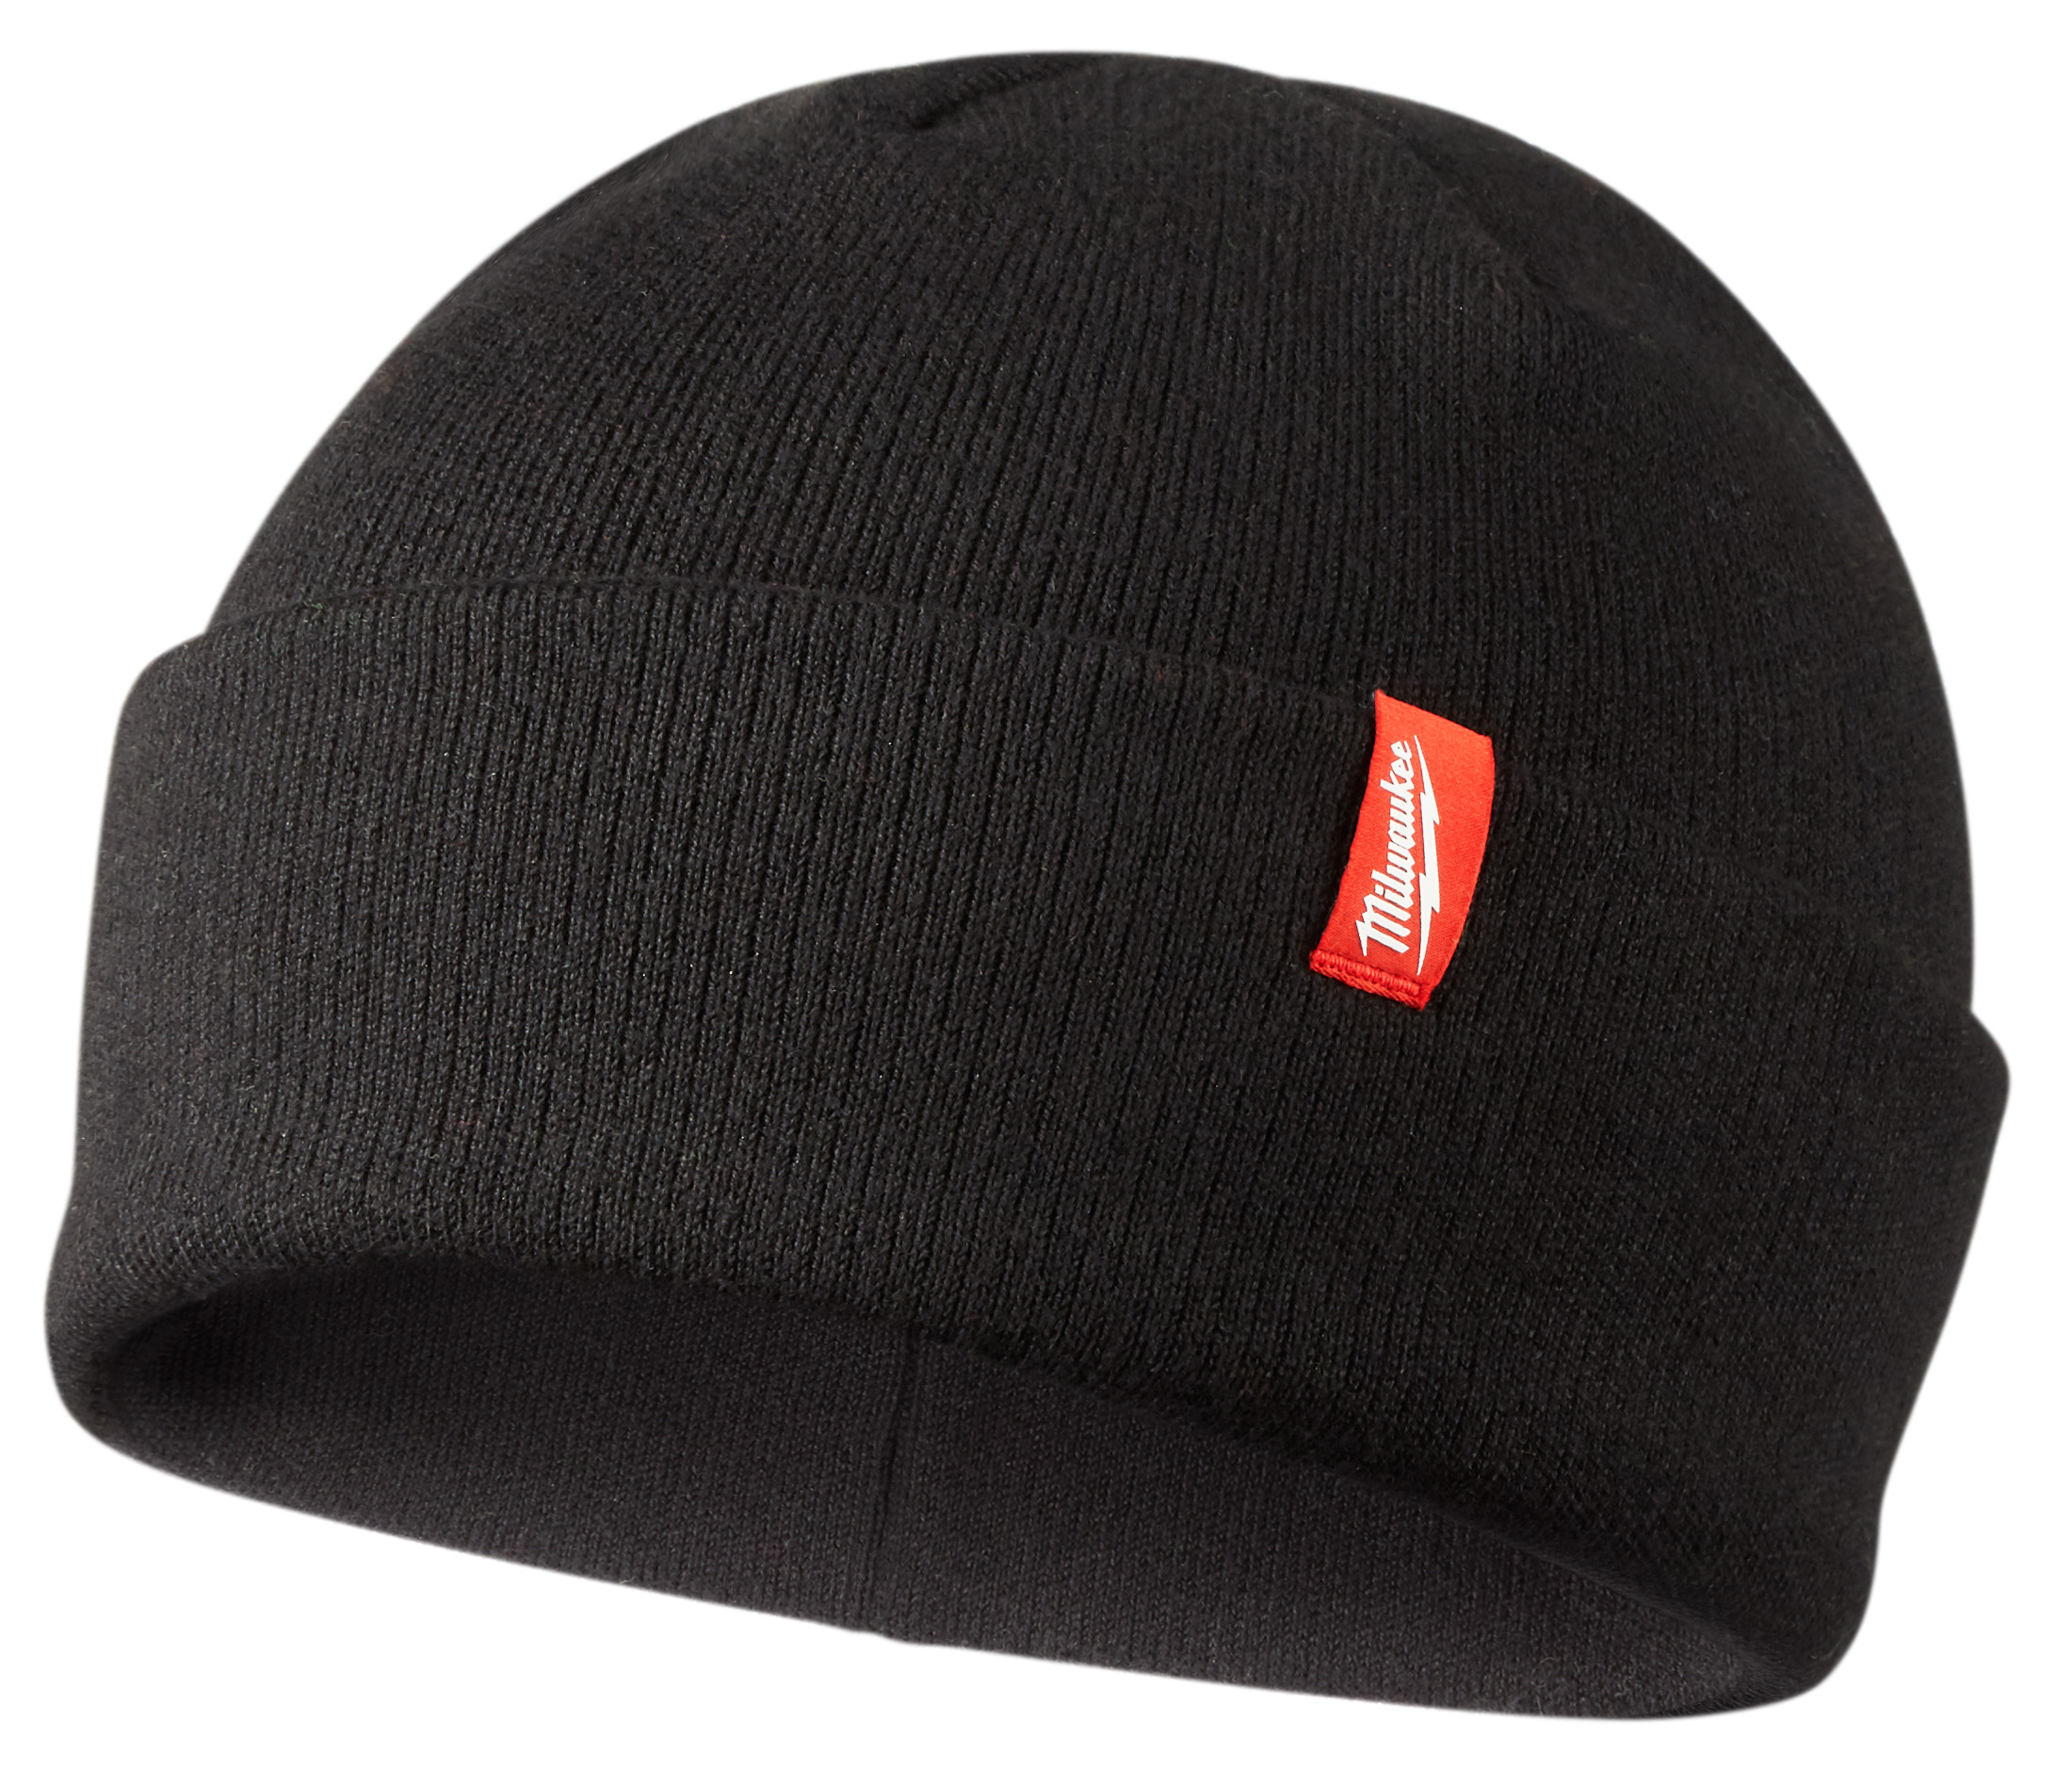 Milwaukee® Cuffed beanies feature a heavier yarn weight that helps block wind and provide extra warmth in cold conditions. Durable 98% polyester, 2% spandex construction resists pilling, snagging and manages moisture to help prevent sweating and overheating. Product intended for cold weather use.